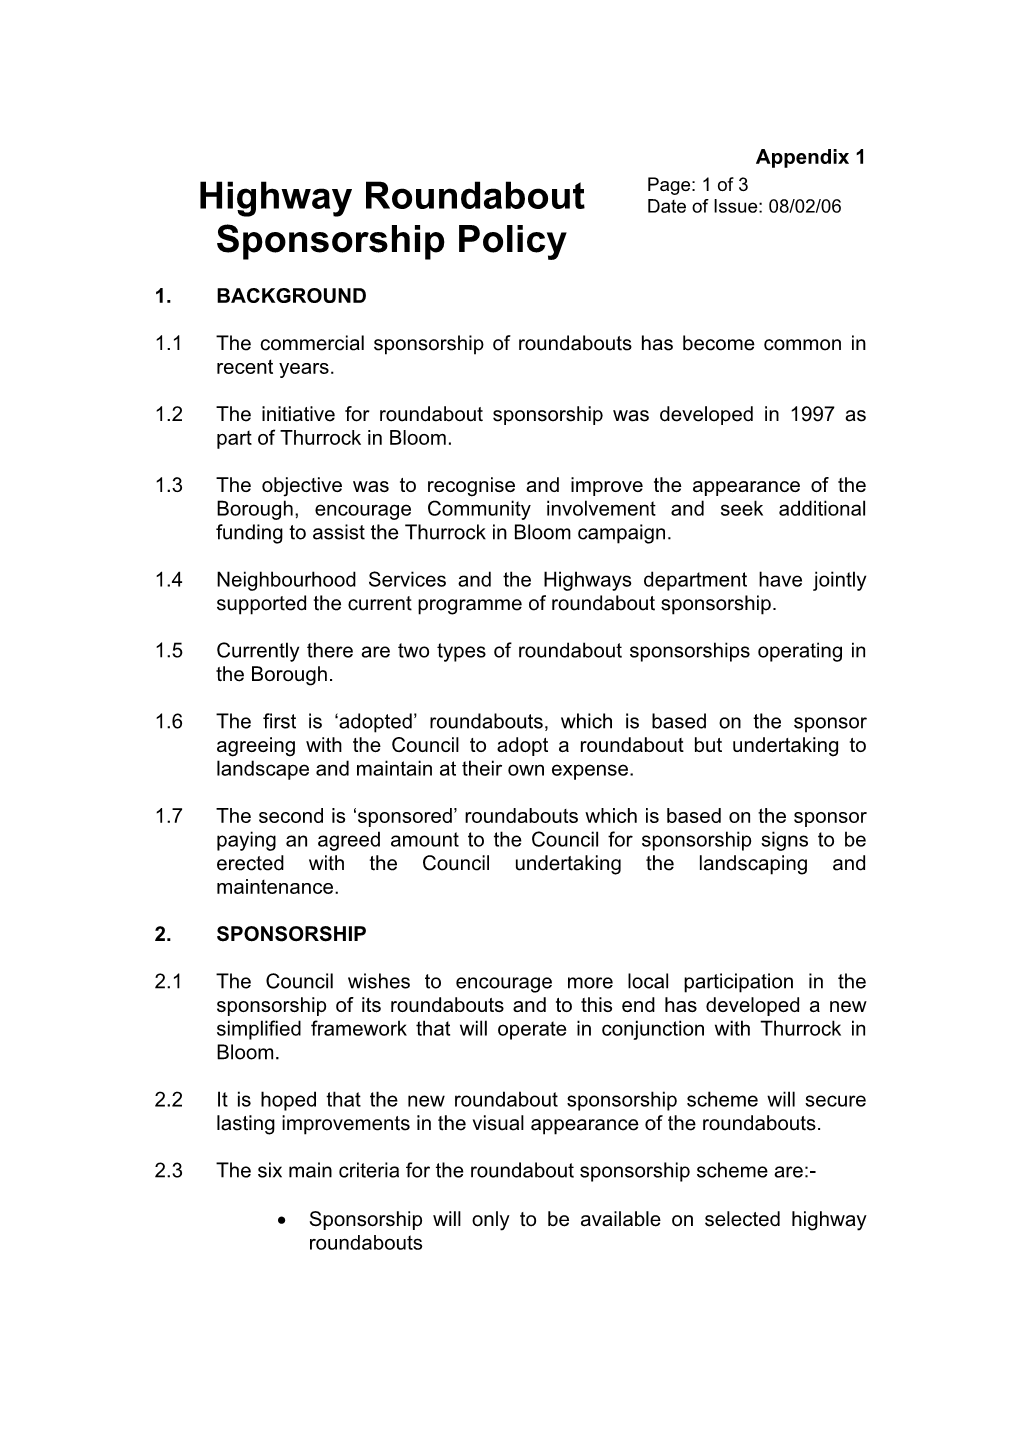 Highway Roundabout Sponsorship Policy